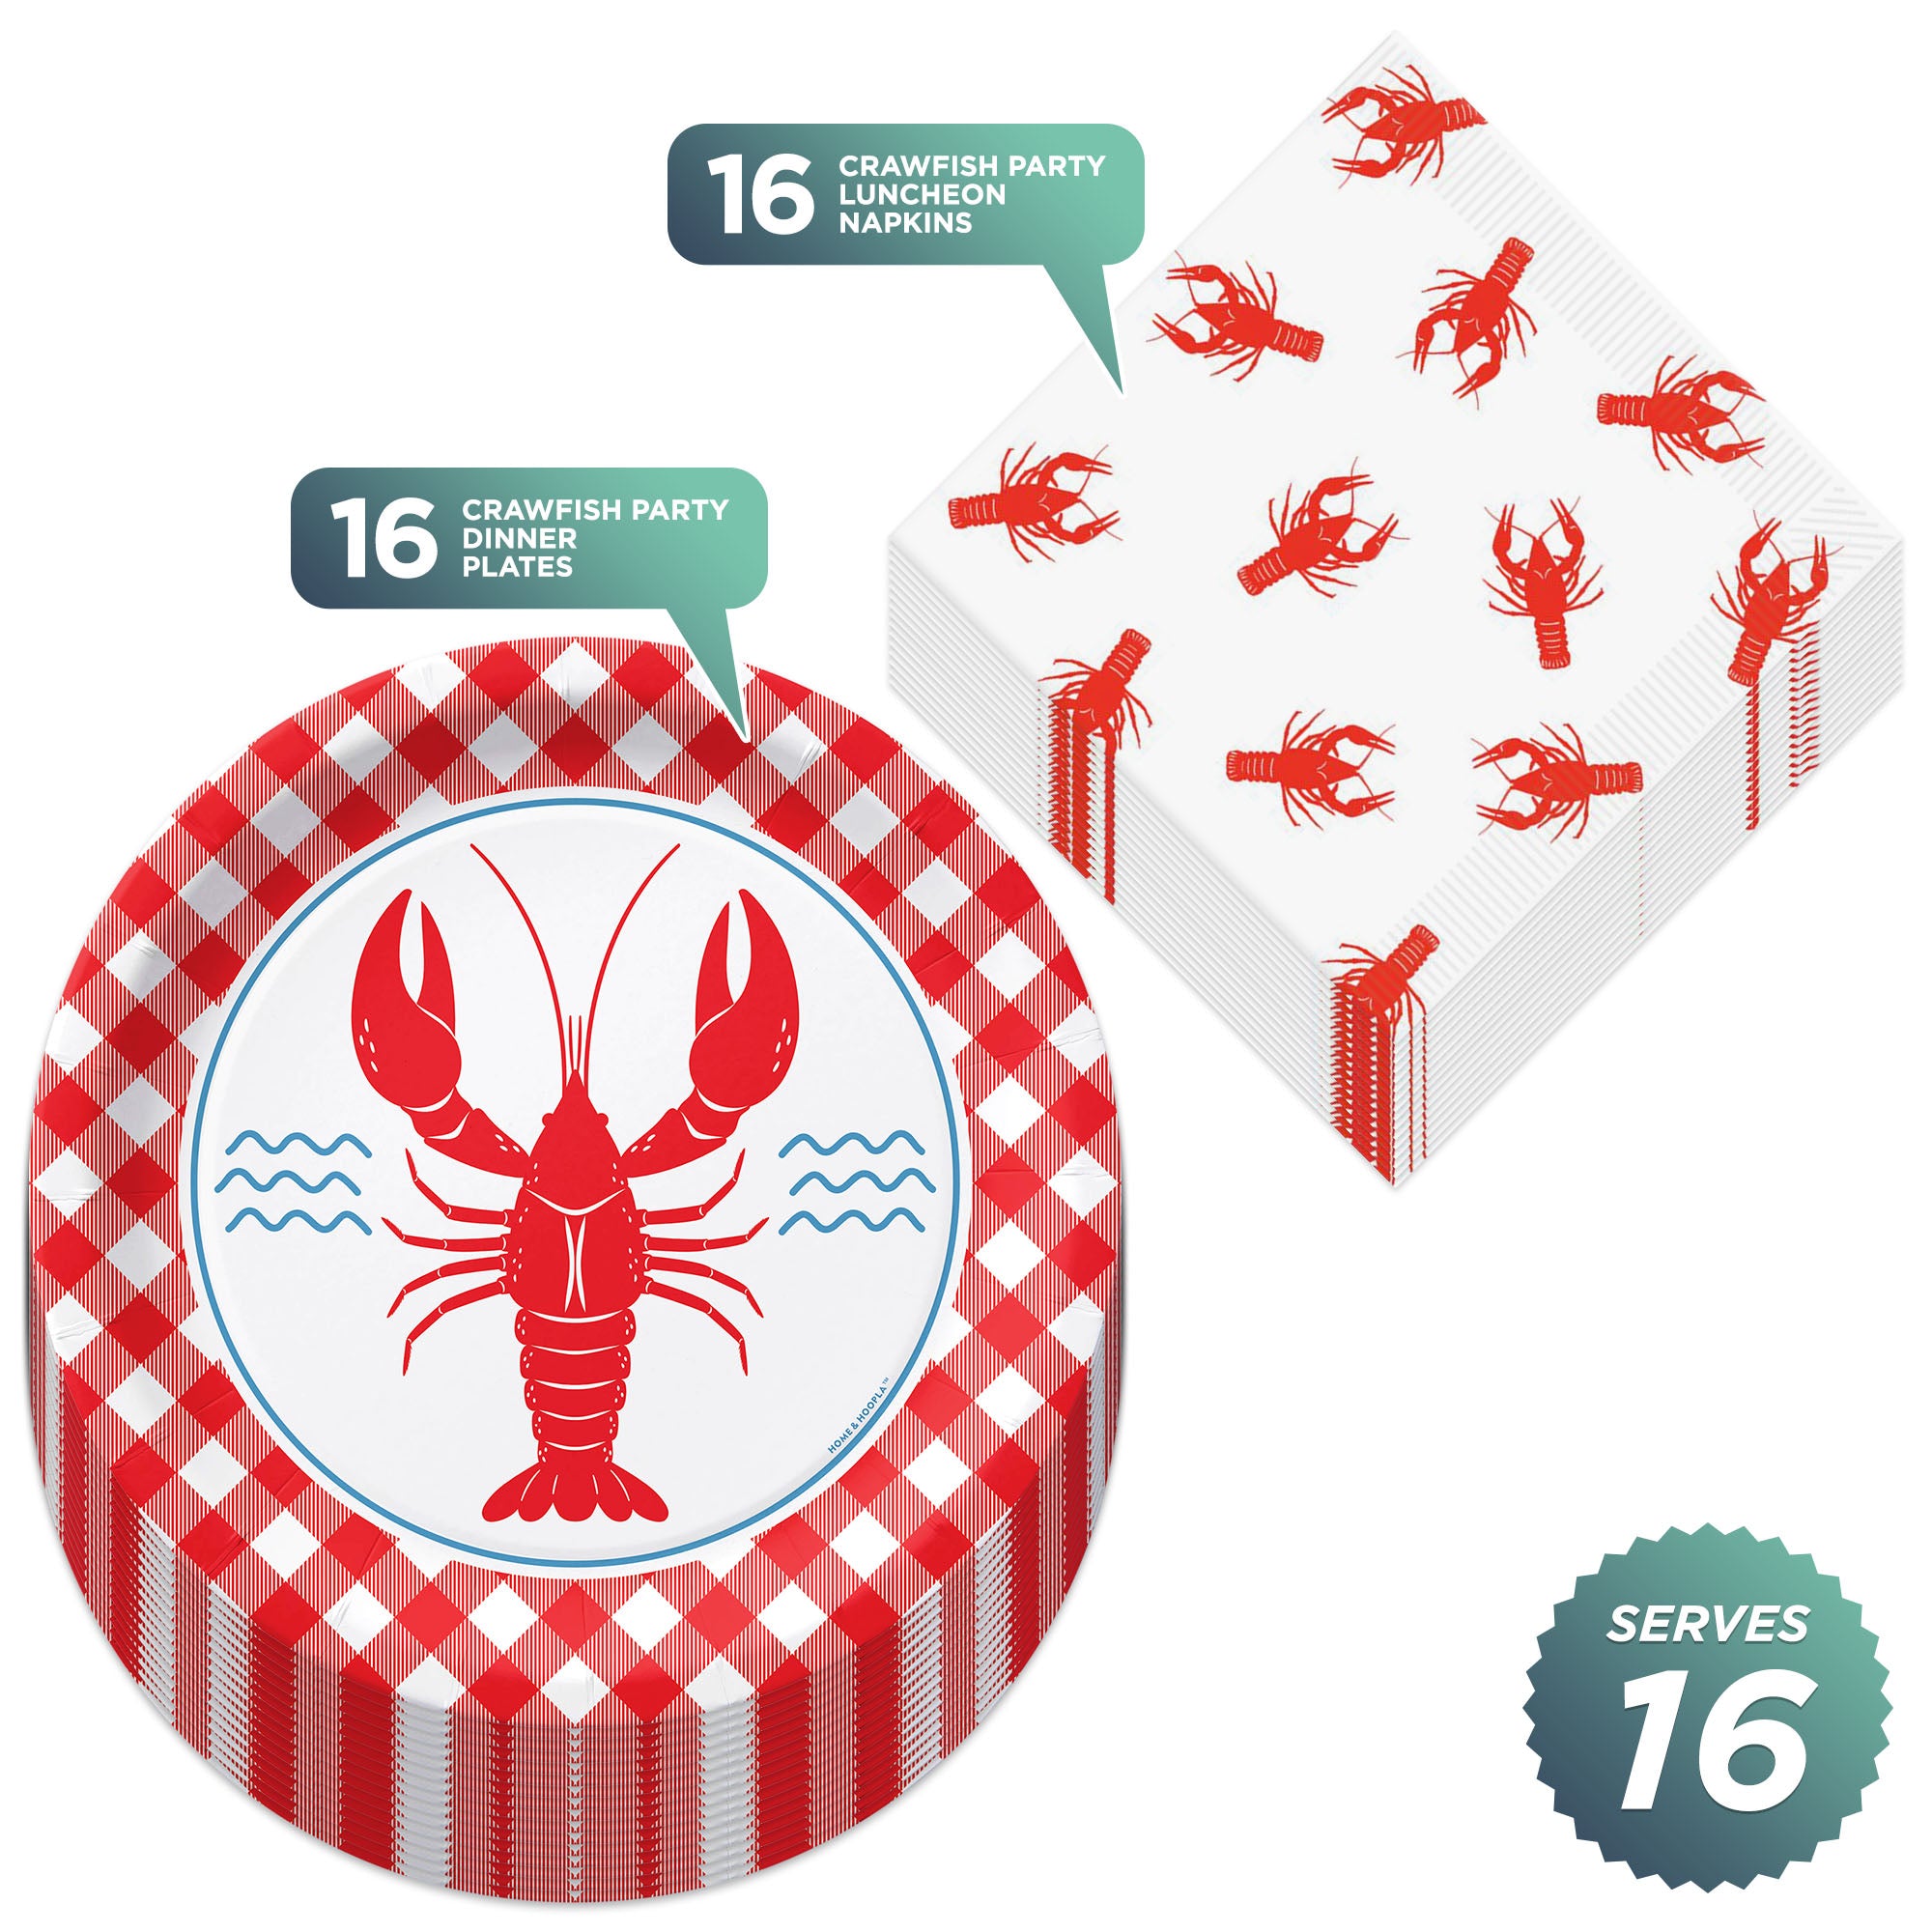  Xigejob Crawfish Boil Party Supplies - Lobster Boil Party  Decorations Tableware, Plate, Cup, Napkin, Tablecloth, Cutlery, Crayfish  Crab Seafood Boil Party Supplies For Birthday Baby Shower